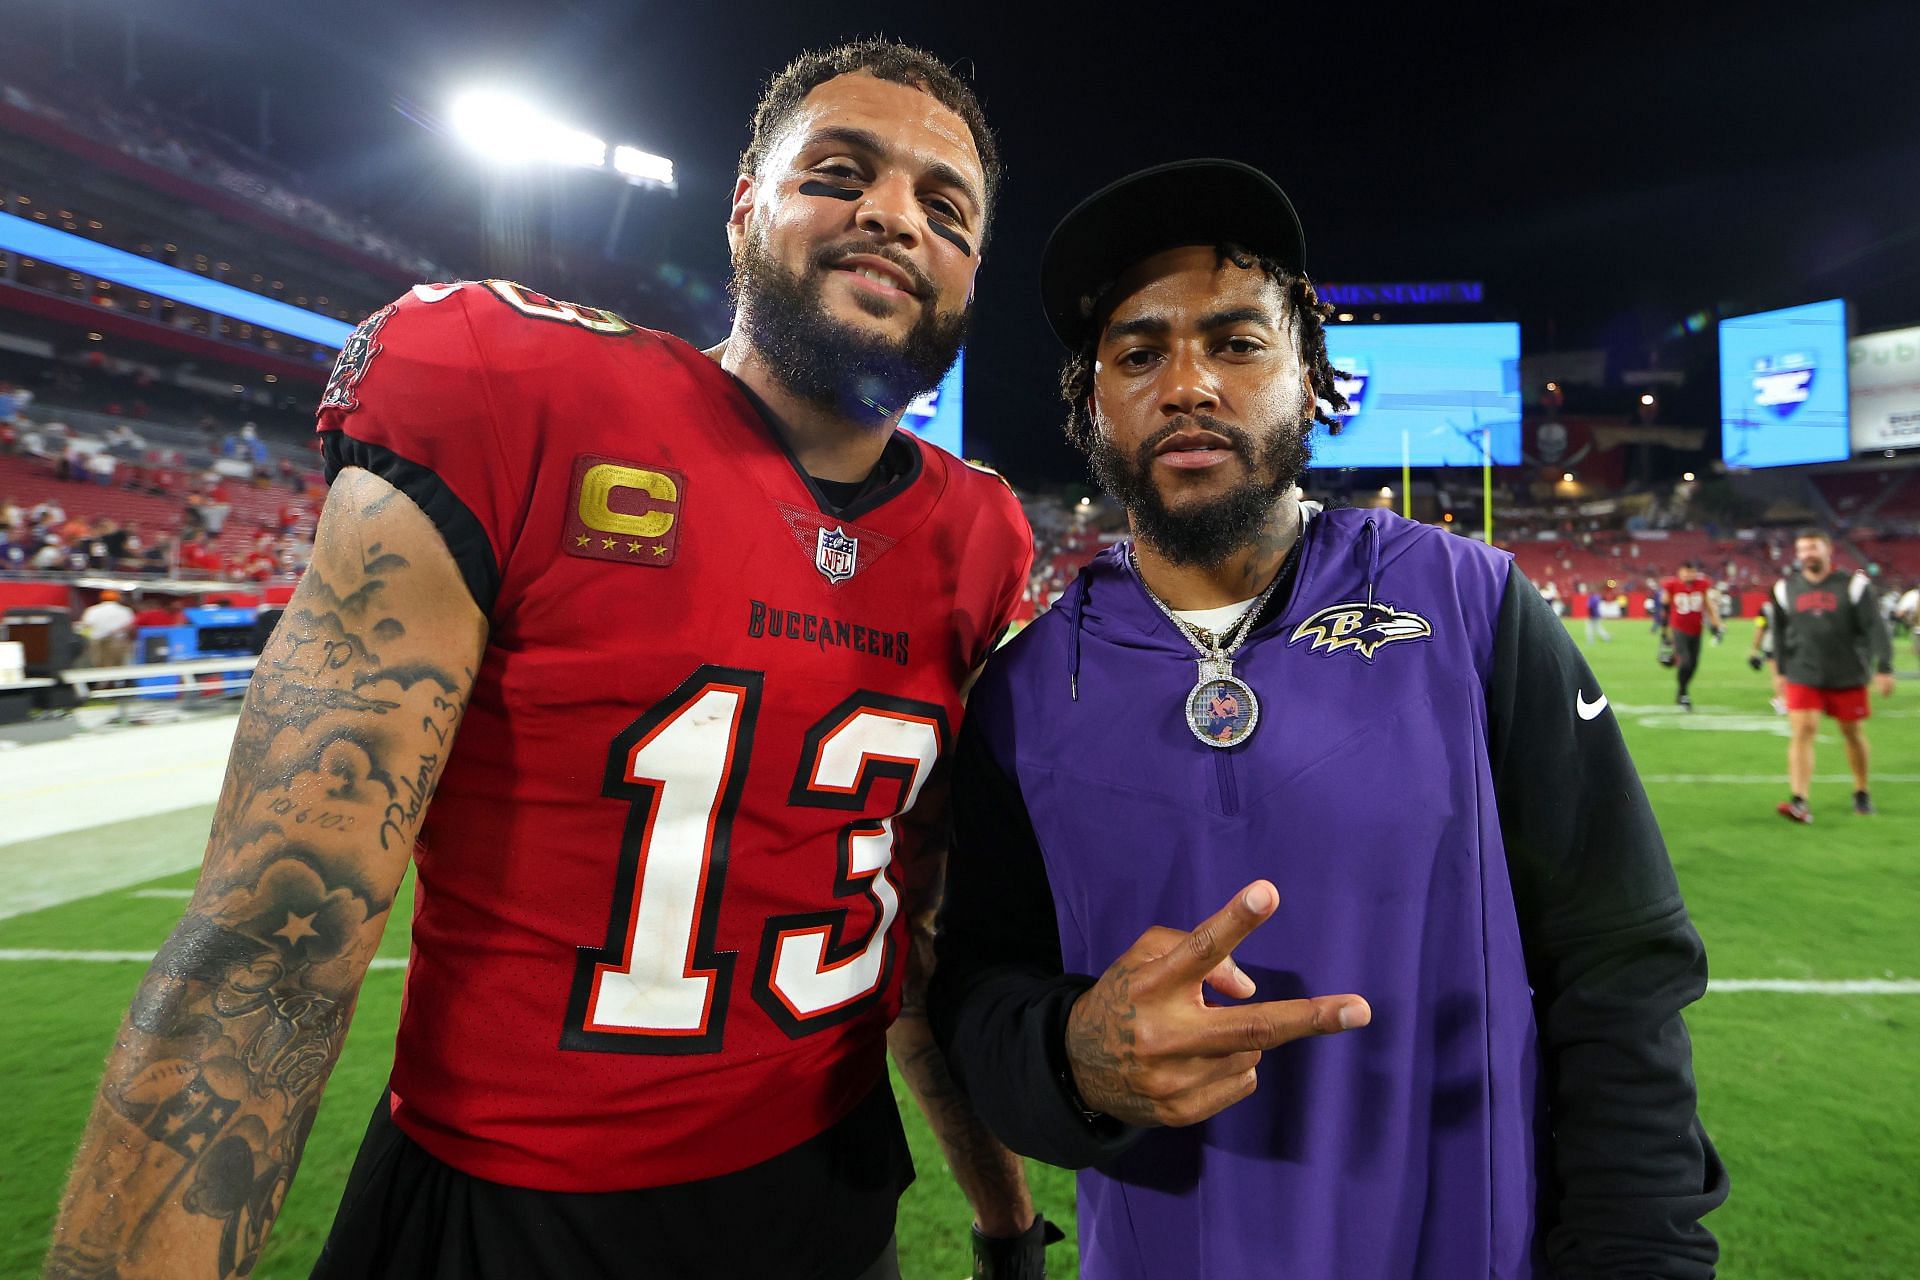 Could Mike Evans be traded?